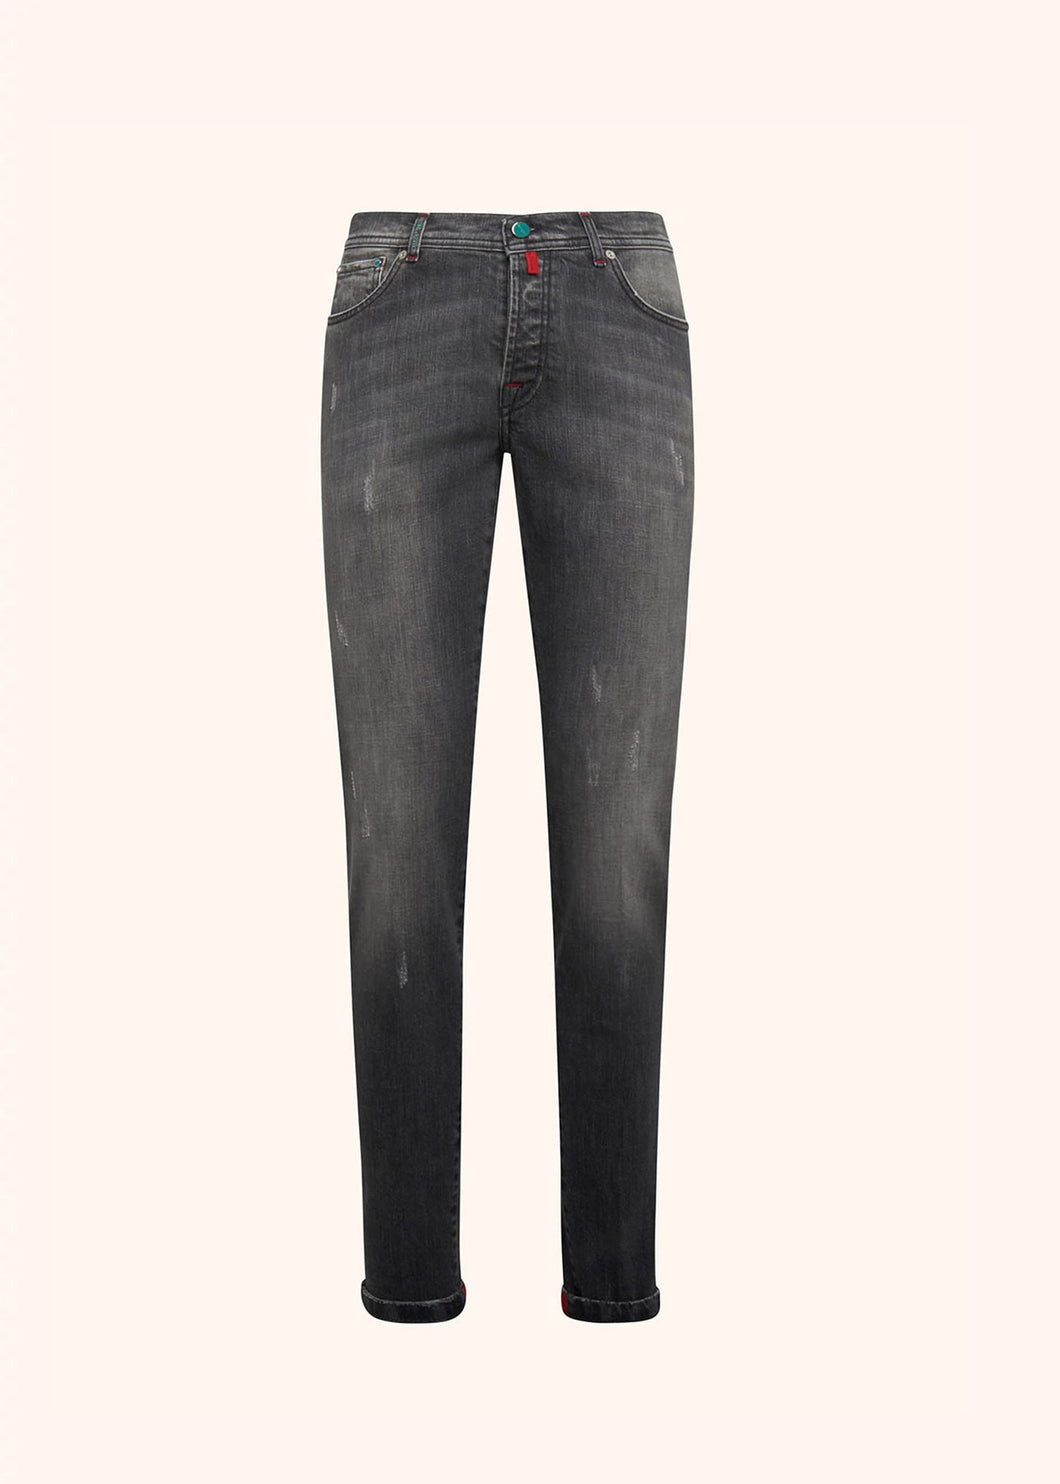 Kiton black trousers for man, made of cotton